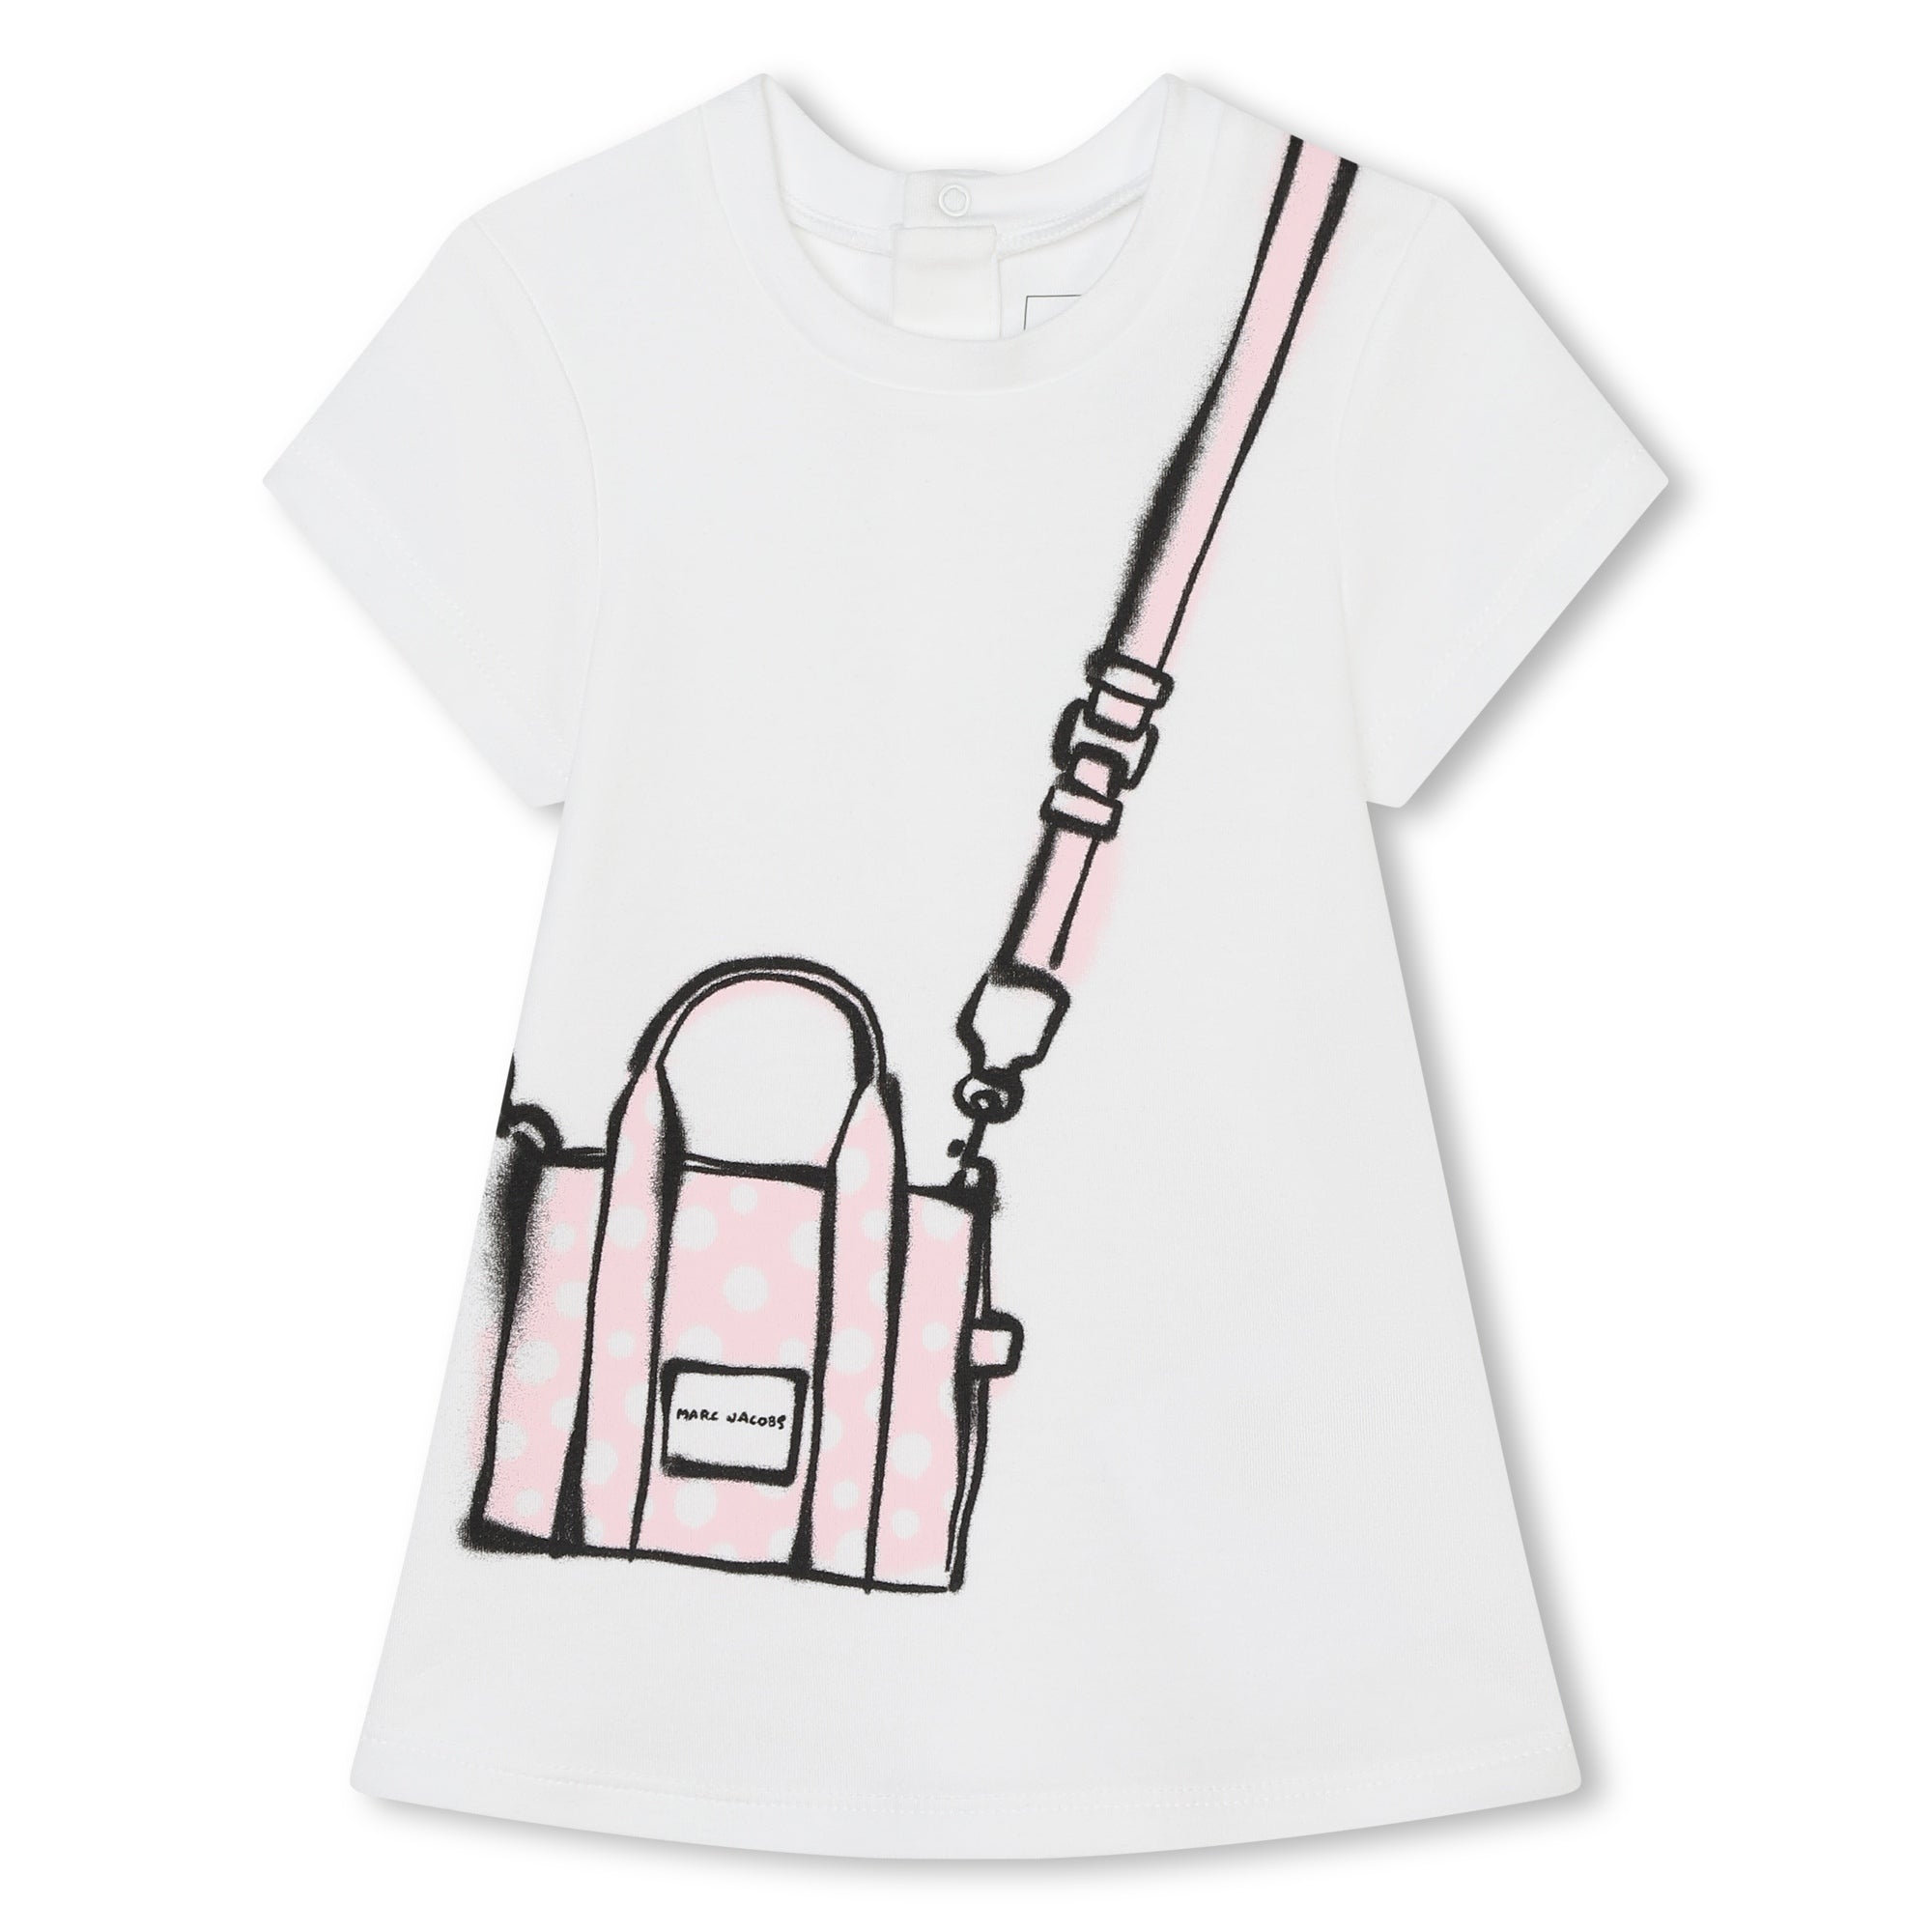 Marc Jacobs Baby Girls Tote Bag White Dress